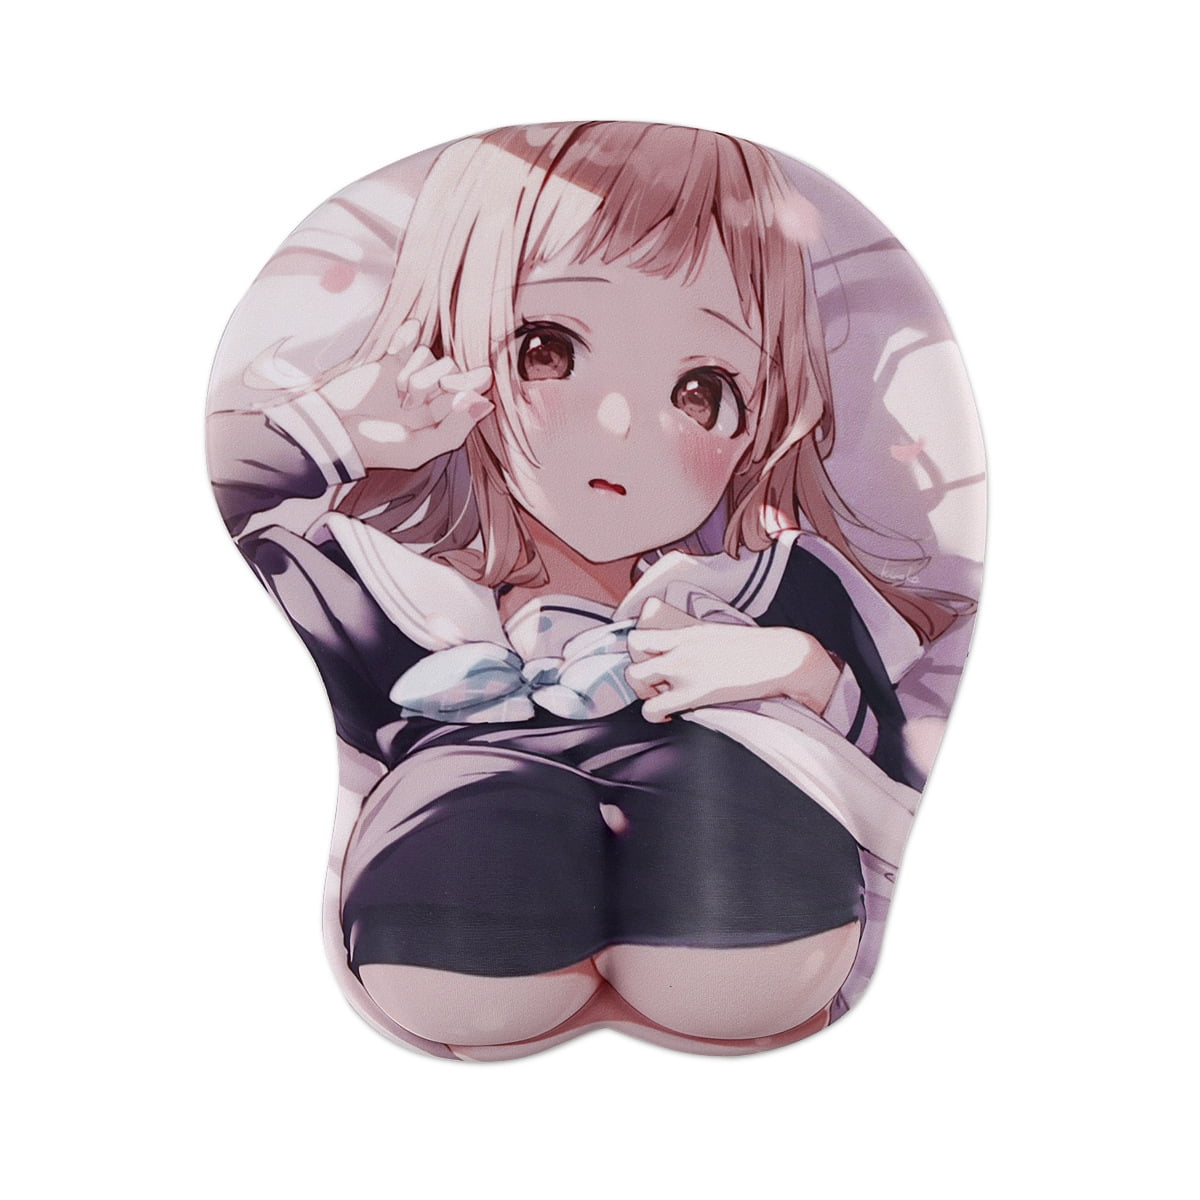 1200px x 1200px - Cute Soft Sexy Cartoon Girl 3D Big Breast Boobs Silicone Wrist Rest Support  Mouse Pad Mat Gaming Mousepad-RJ-030 - Walmart.com